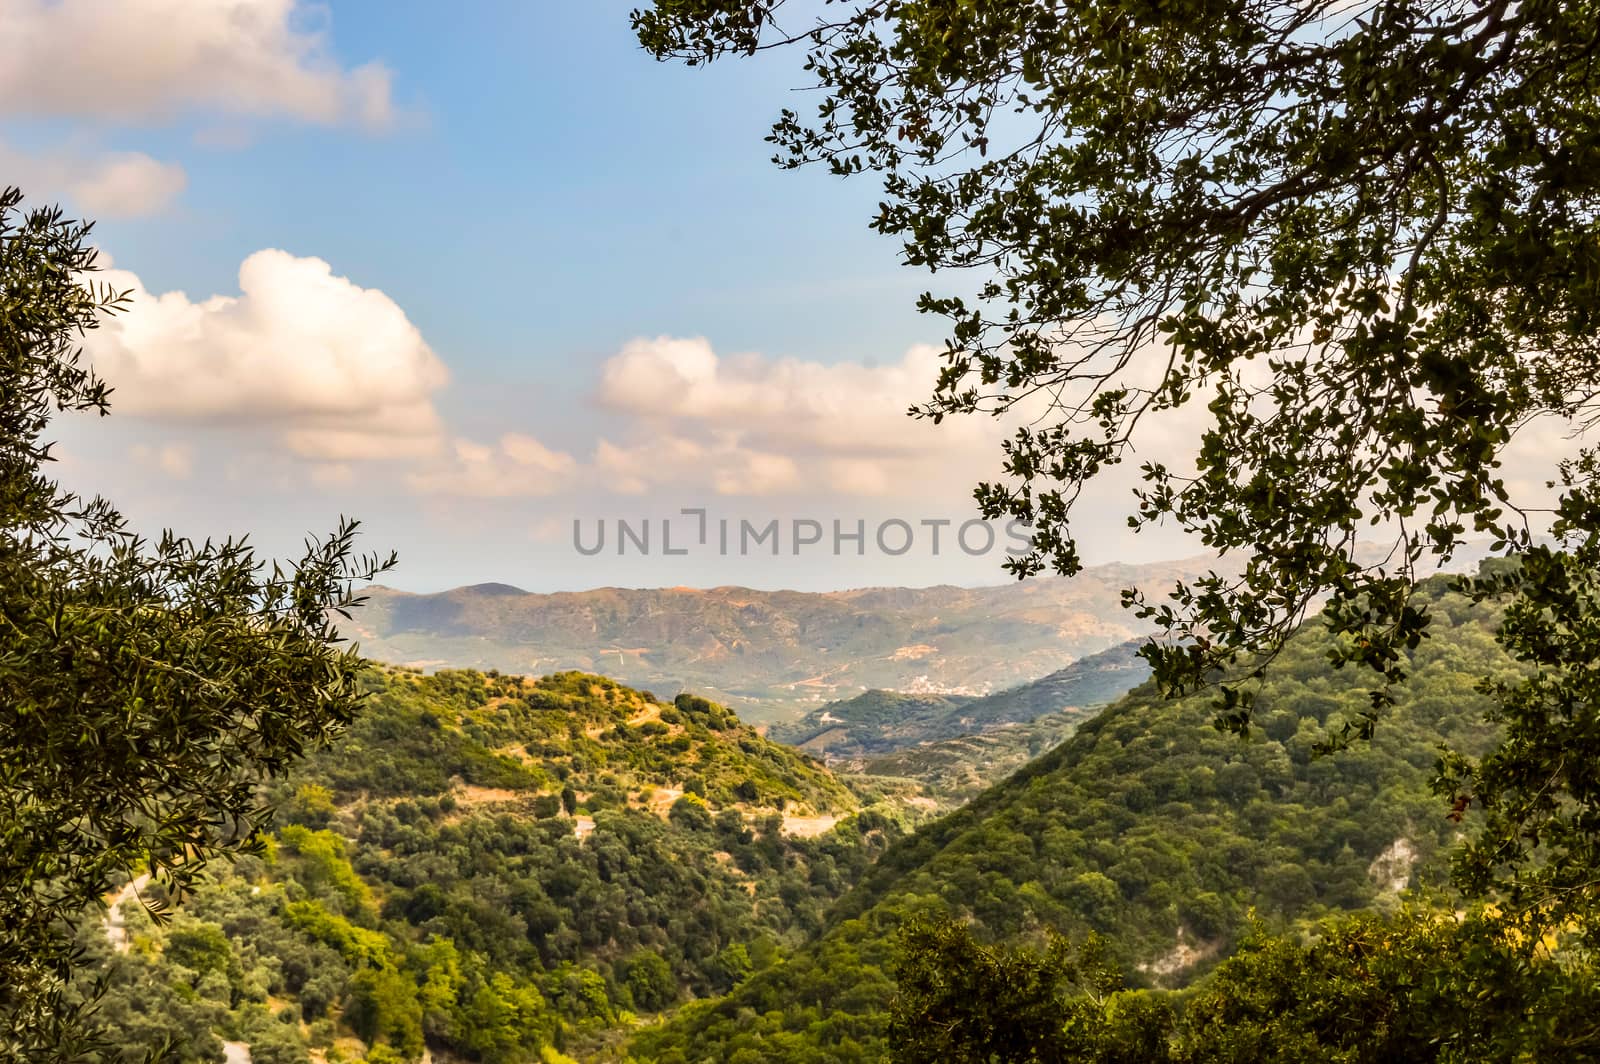 View of hills in Crete with trees in the foreground